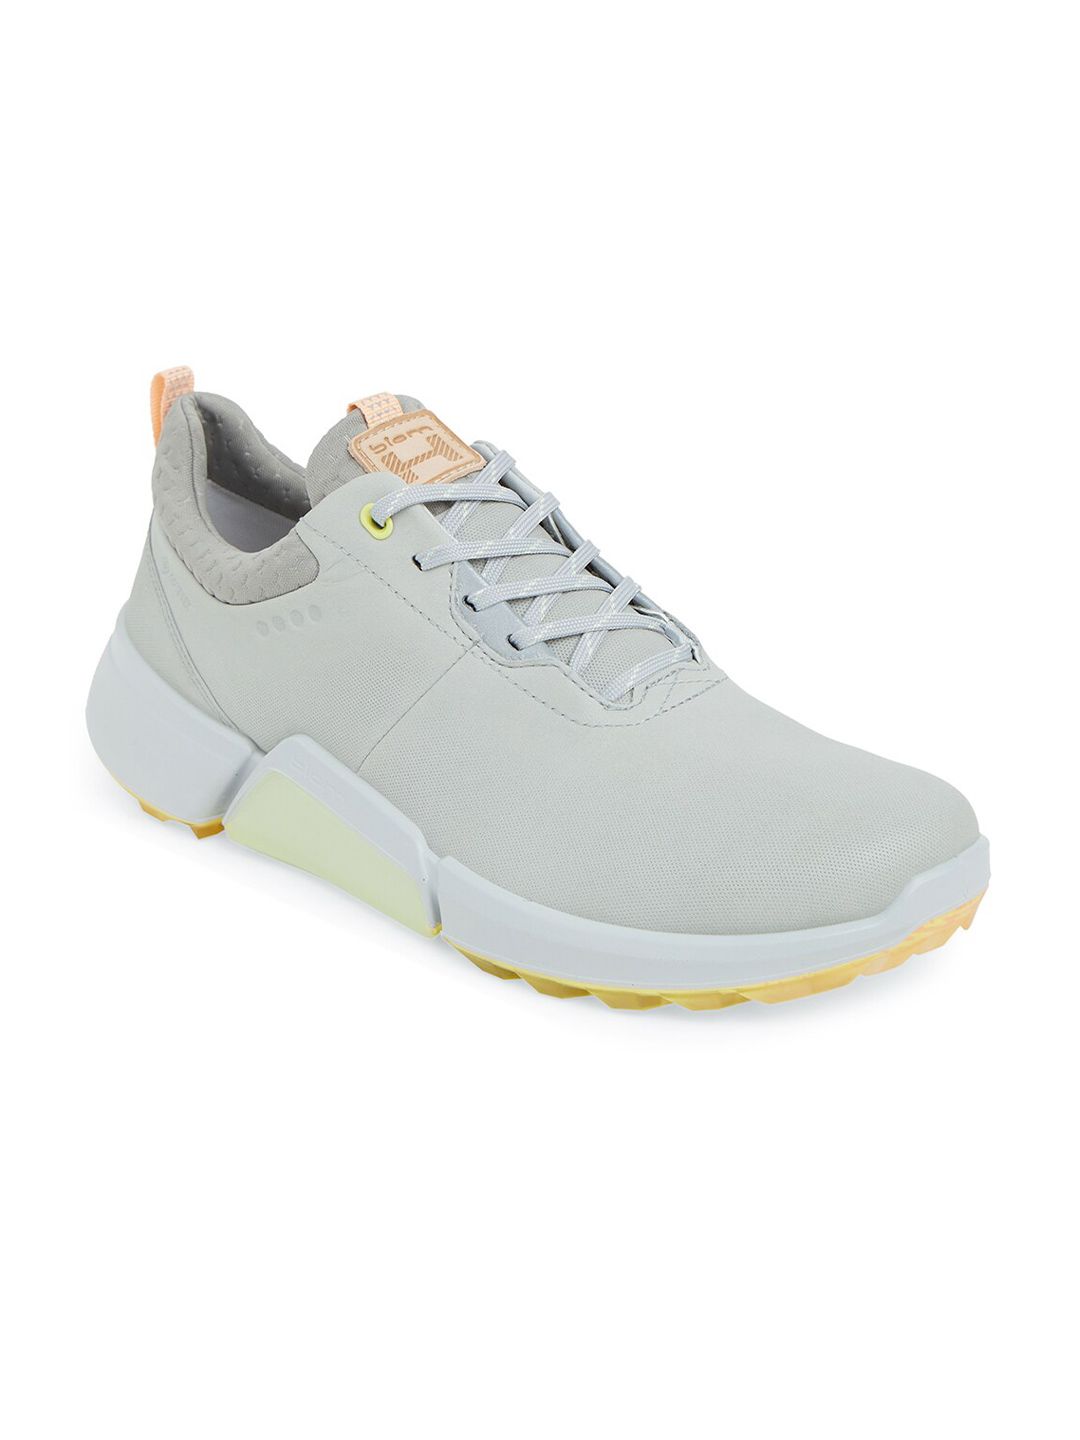 ECCO Women Grey Hybrid Performance Leather Golf Non-Marking Shoes Price in India